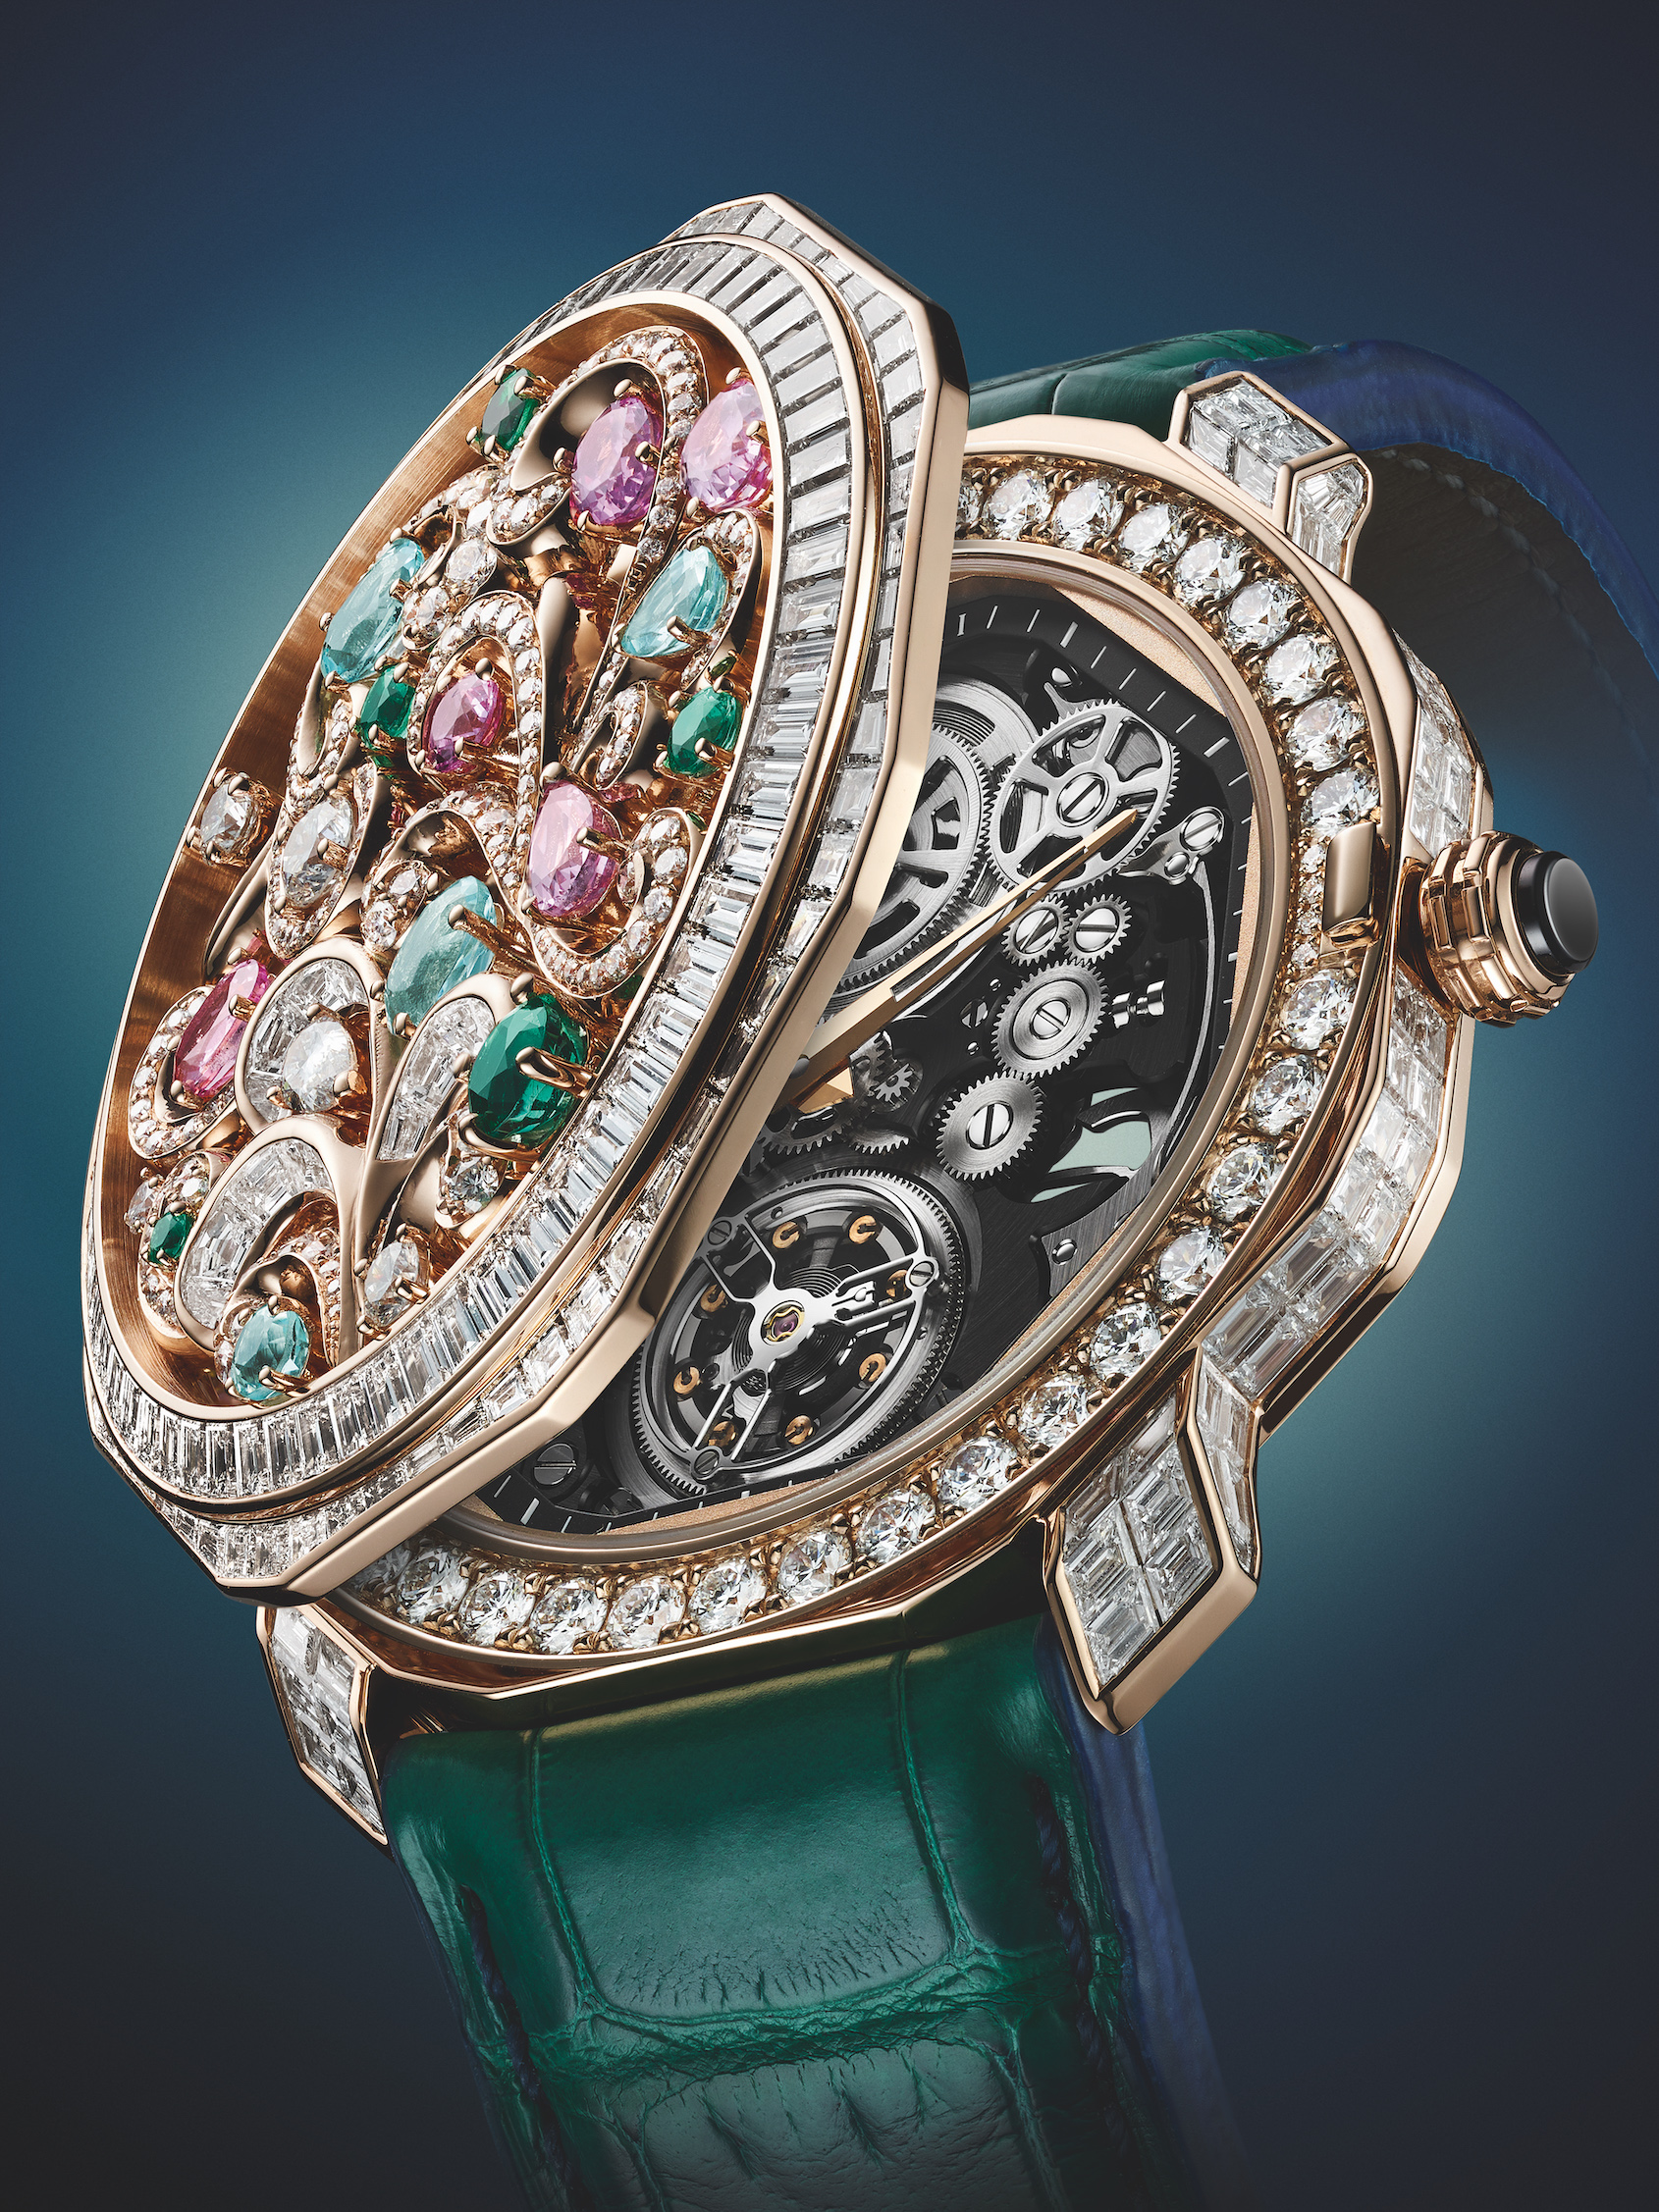 Bulgari releases Baroque high jewellery collection inspired by Rome